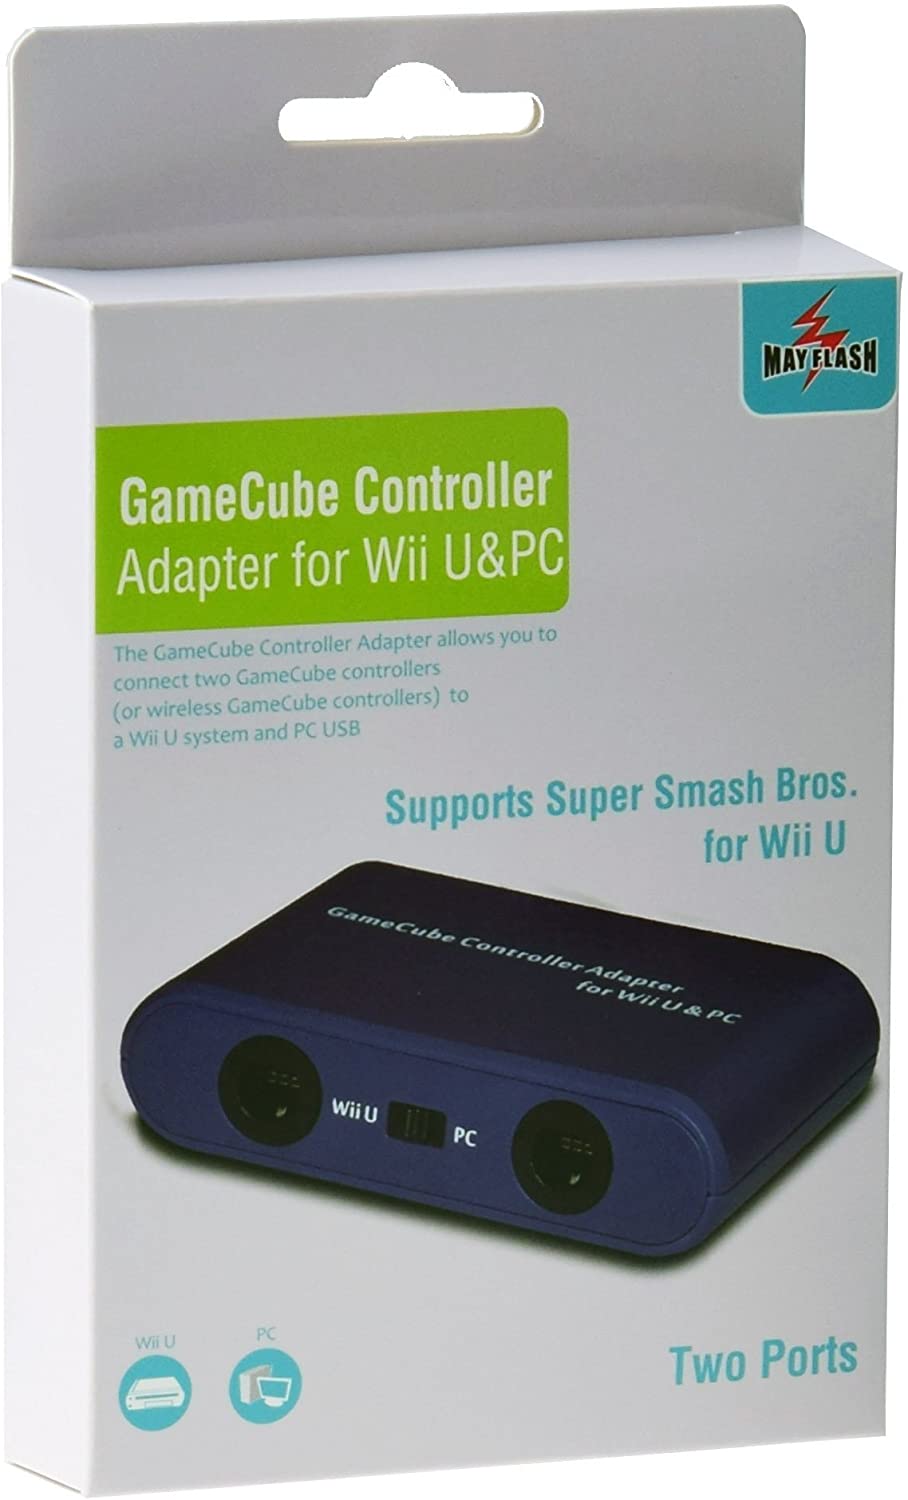 setup a gamecube controller adapter for dolphin emulator on mac